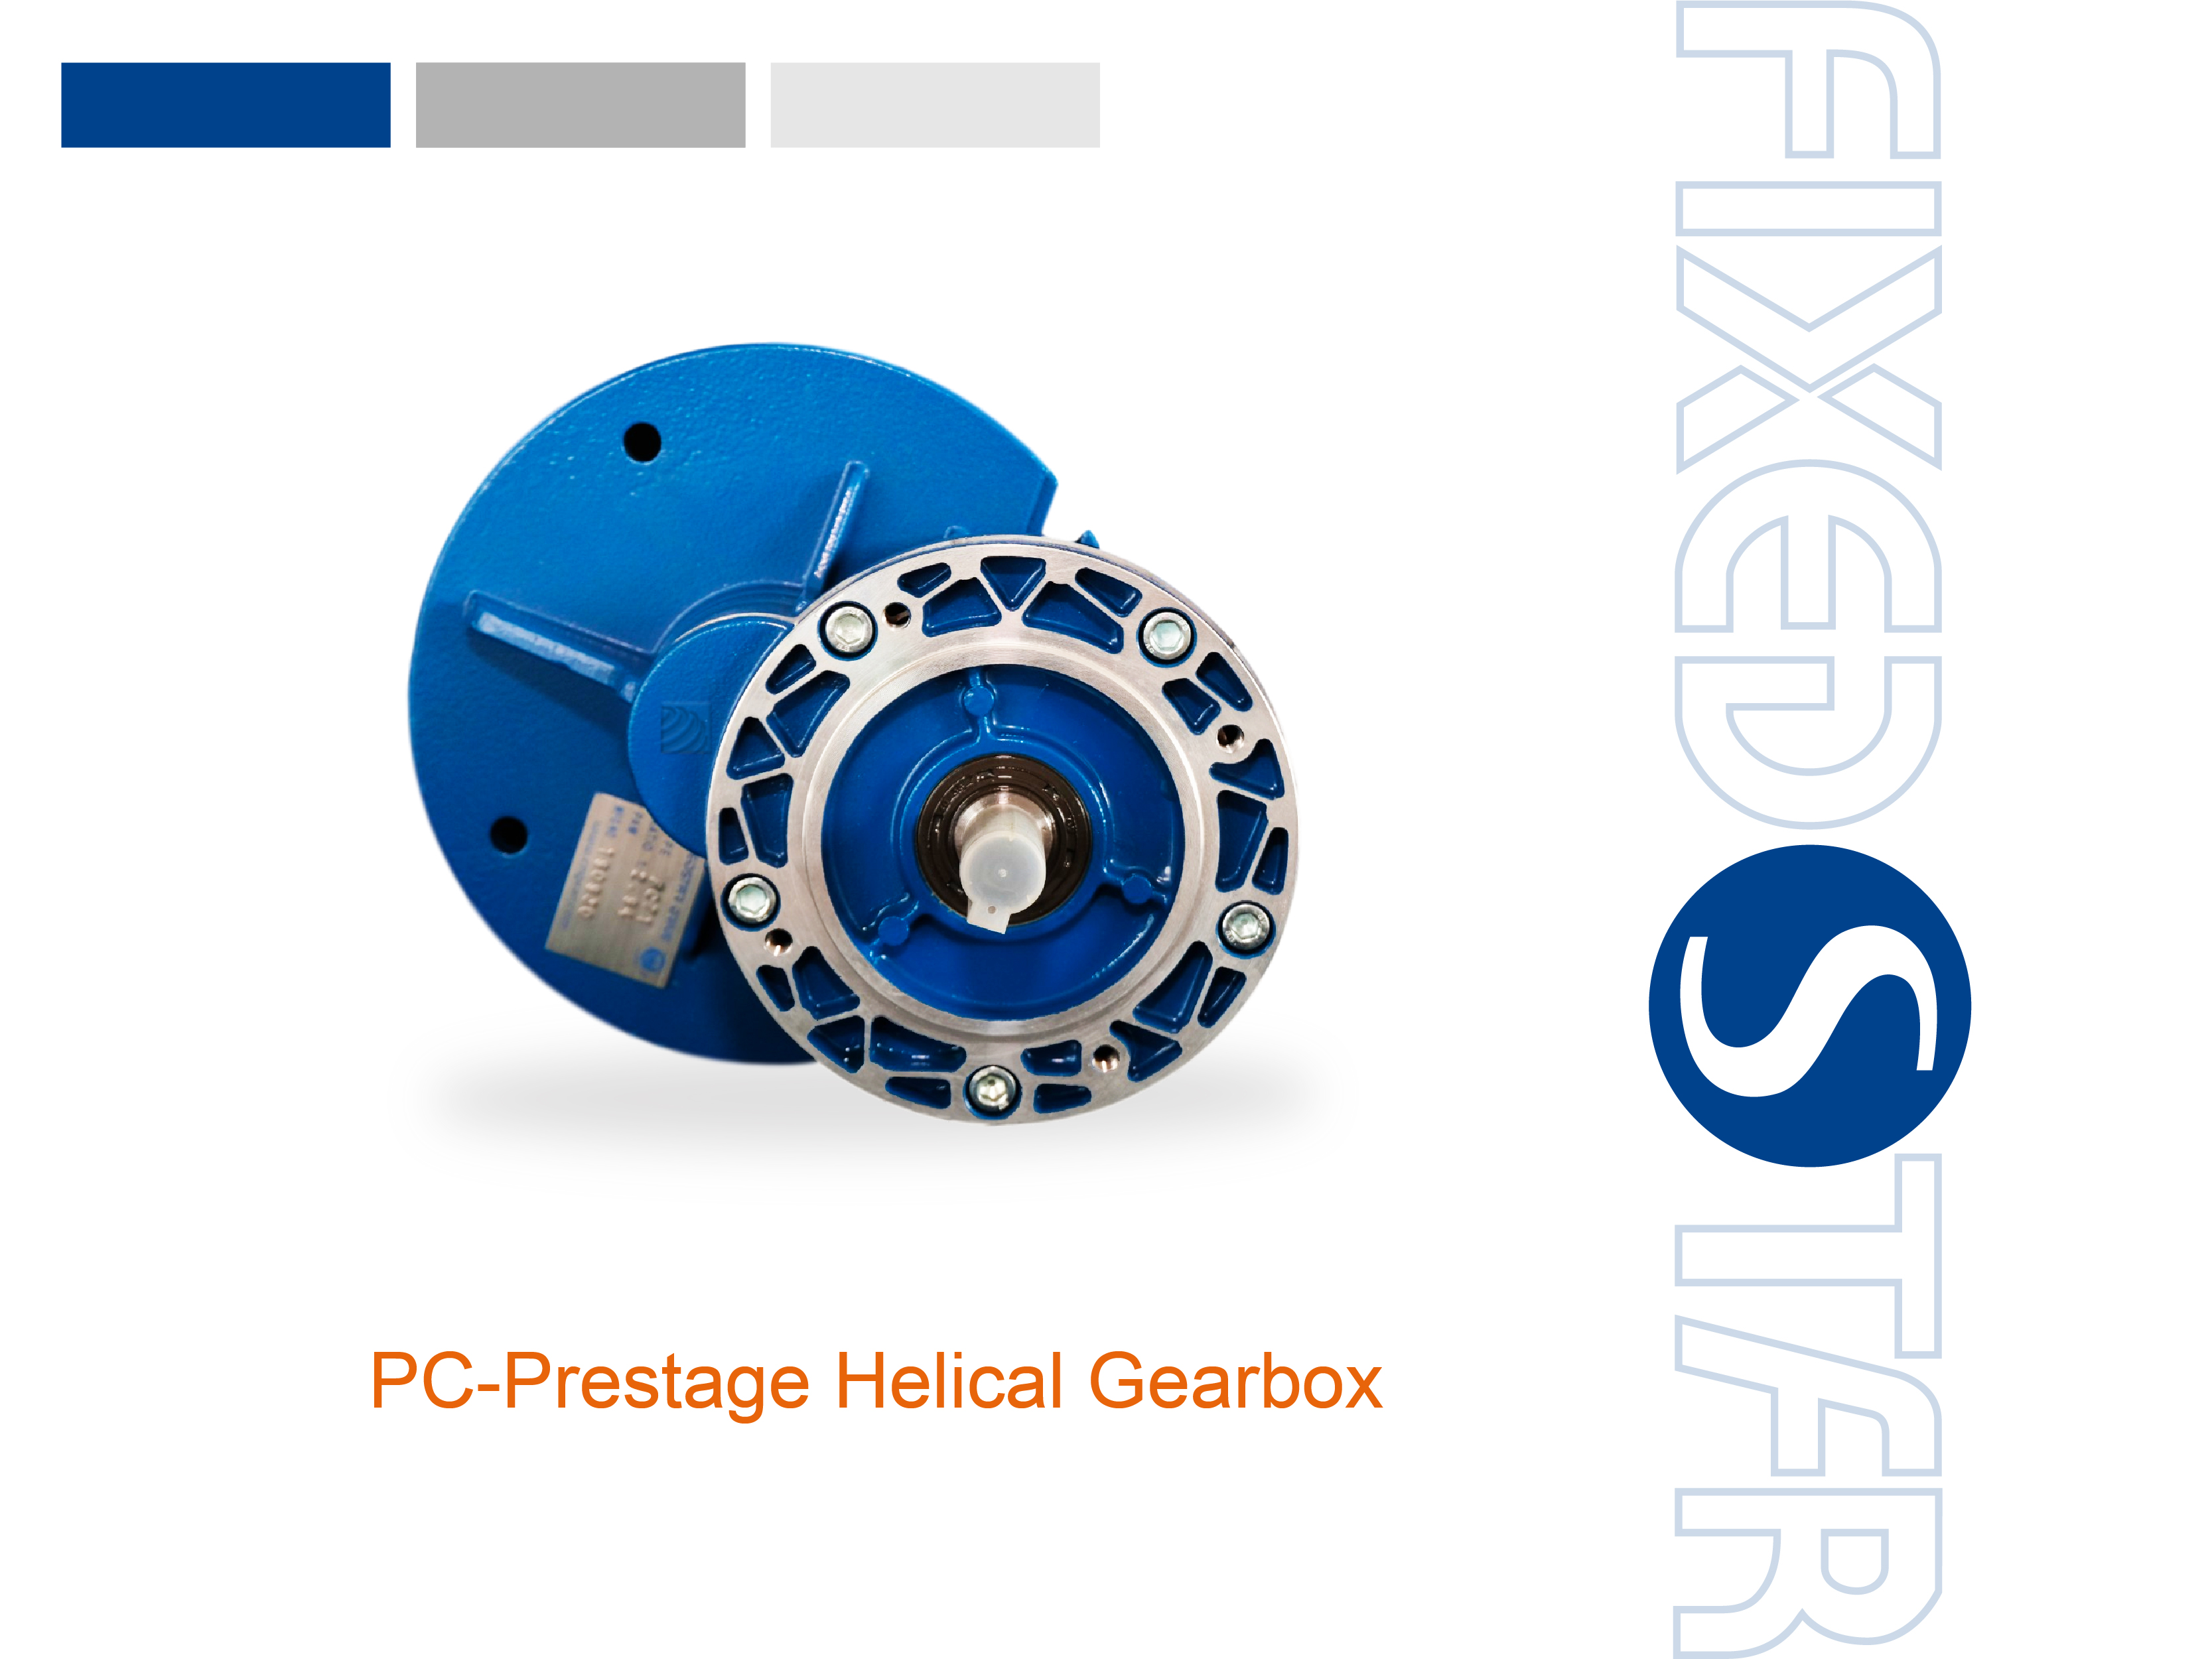 Prestage Helical Gearbox